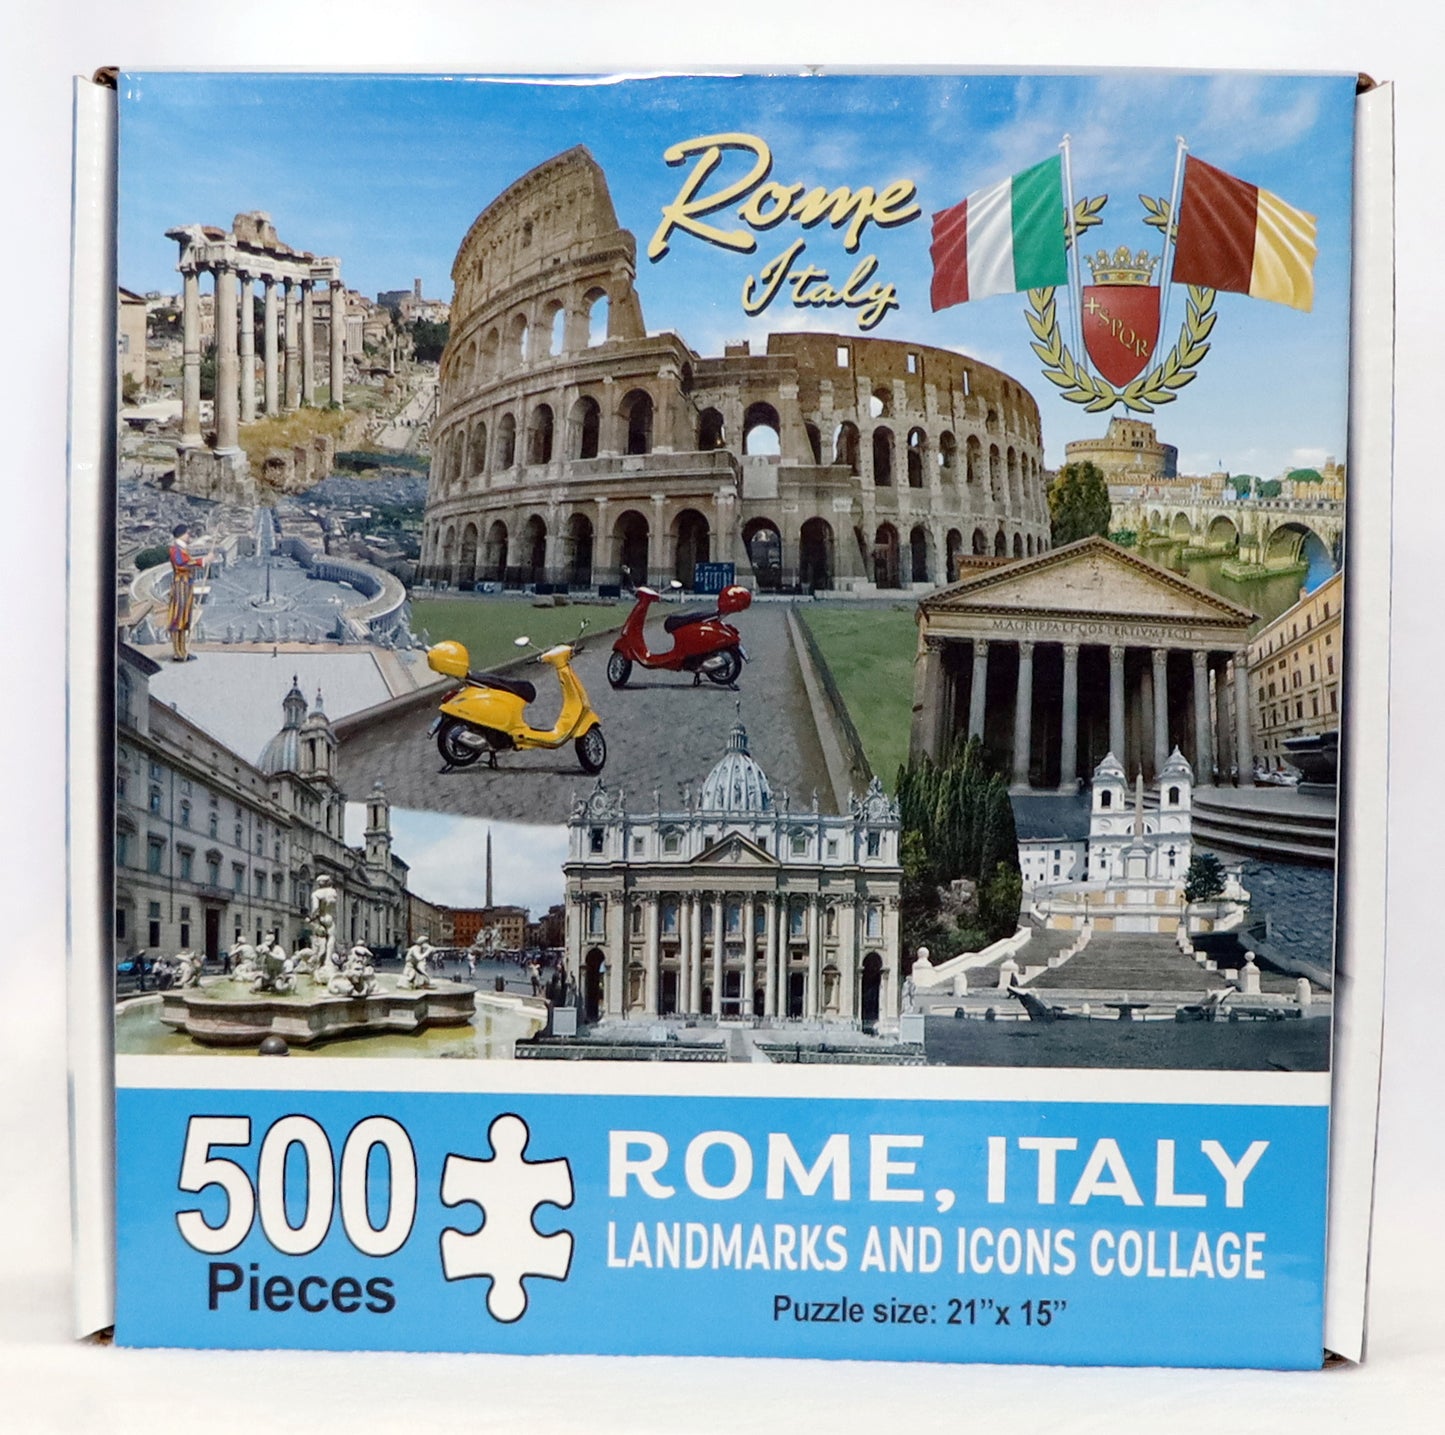 Rome Italy Landmarks and Icons Collage Jigsaw Puzzle 500 pcs (21" x 15" when finished)